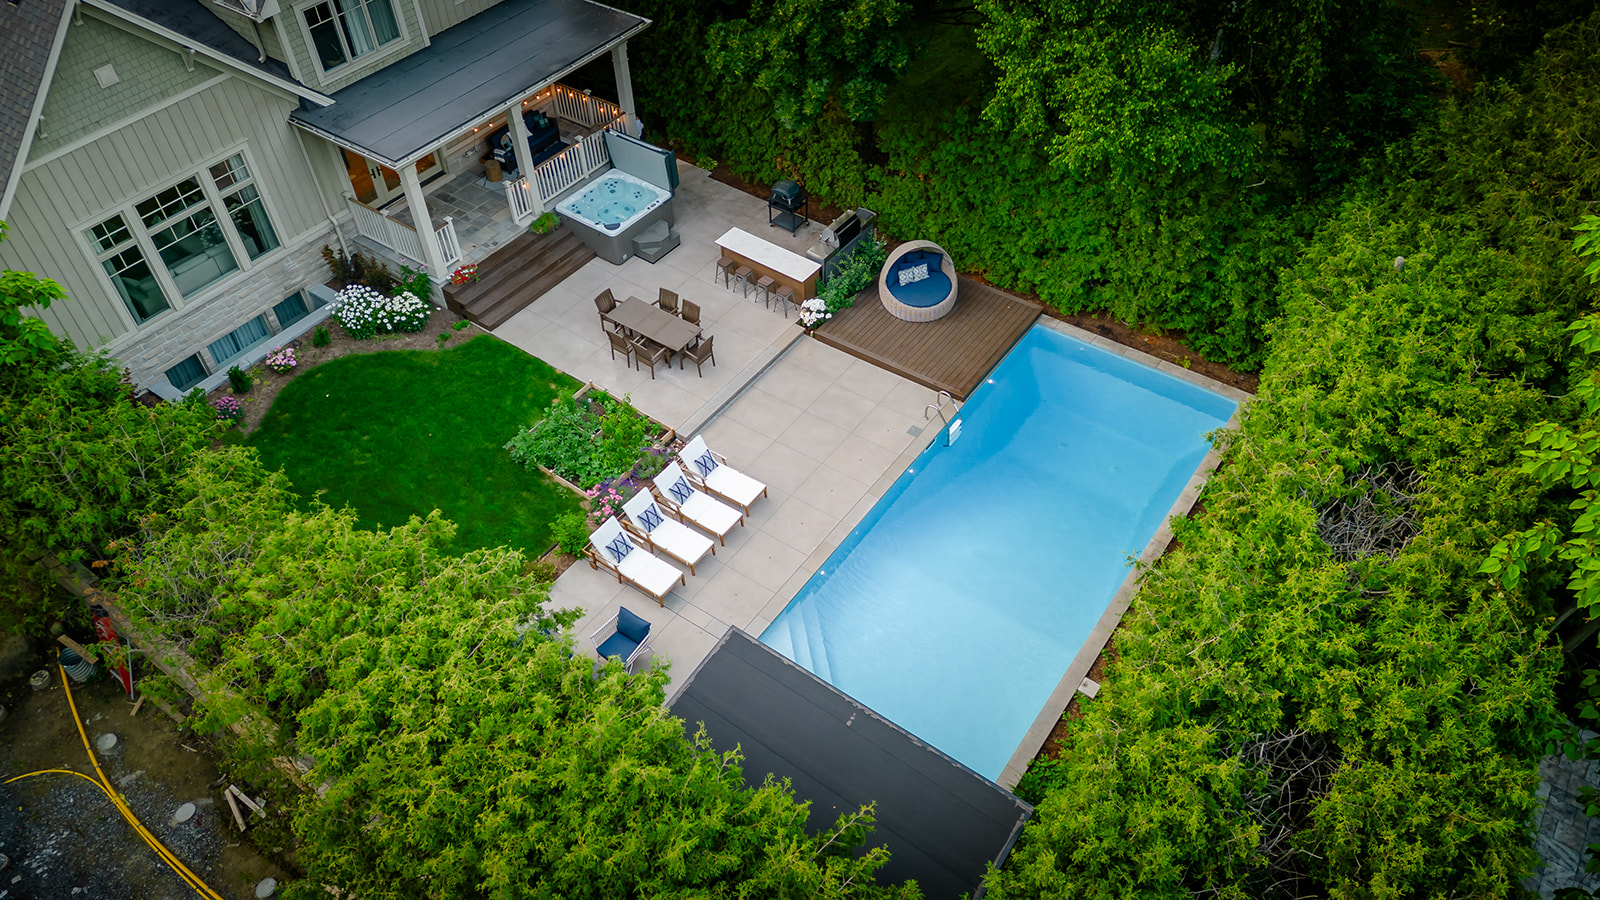 A done shot of an inground pool, and seating areas in the back yard.